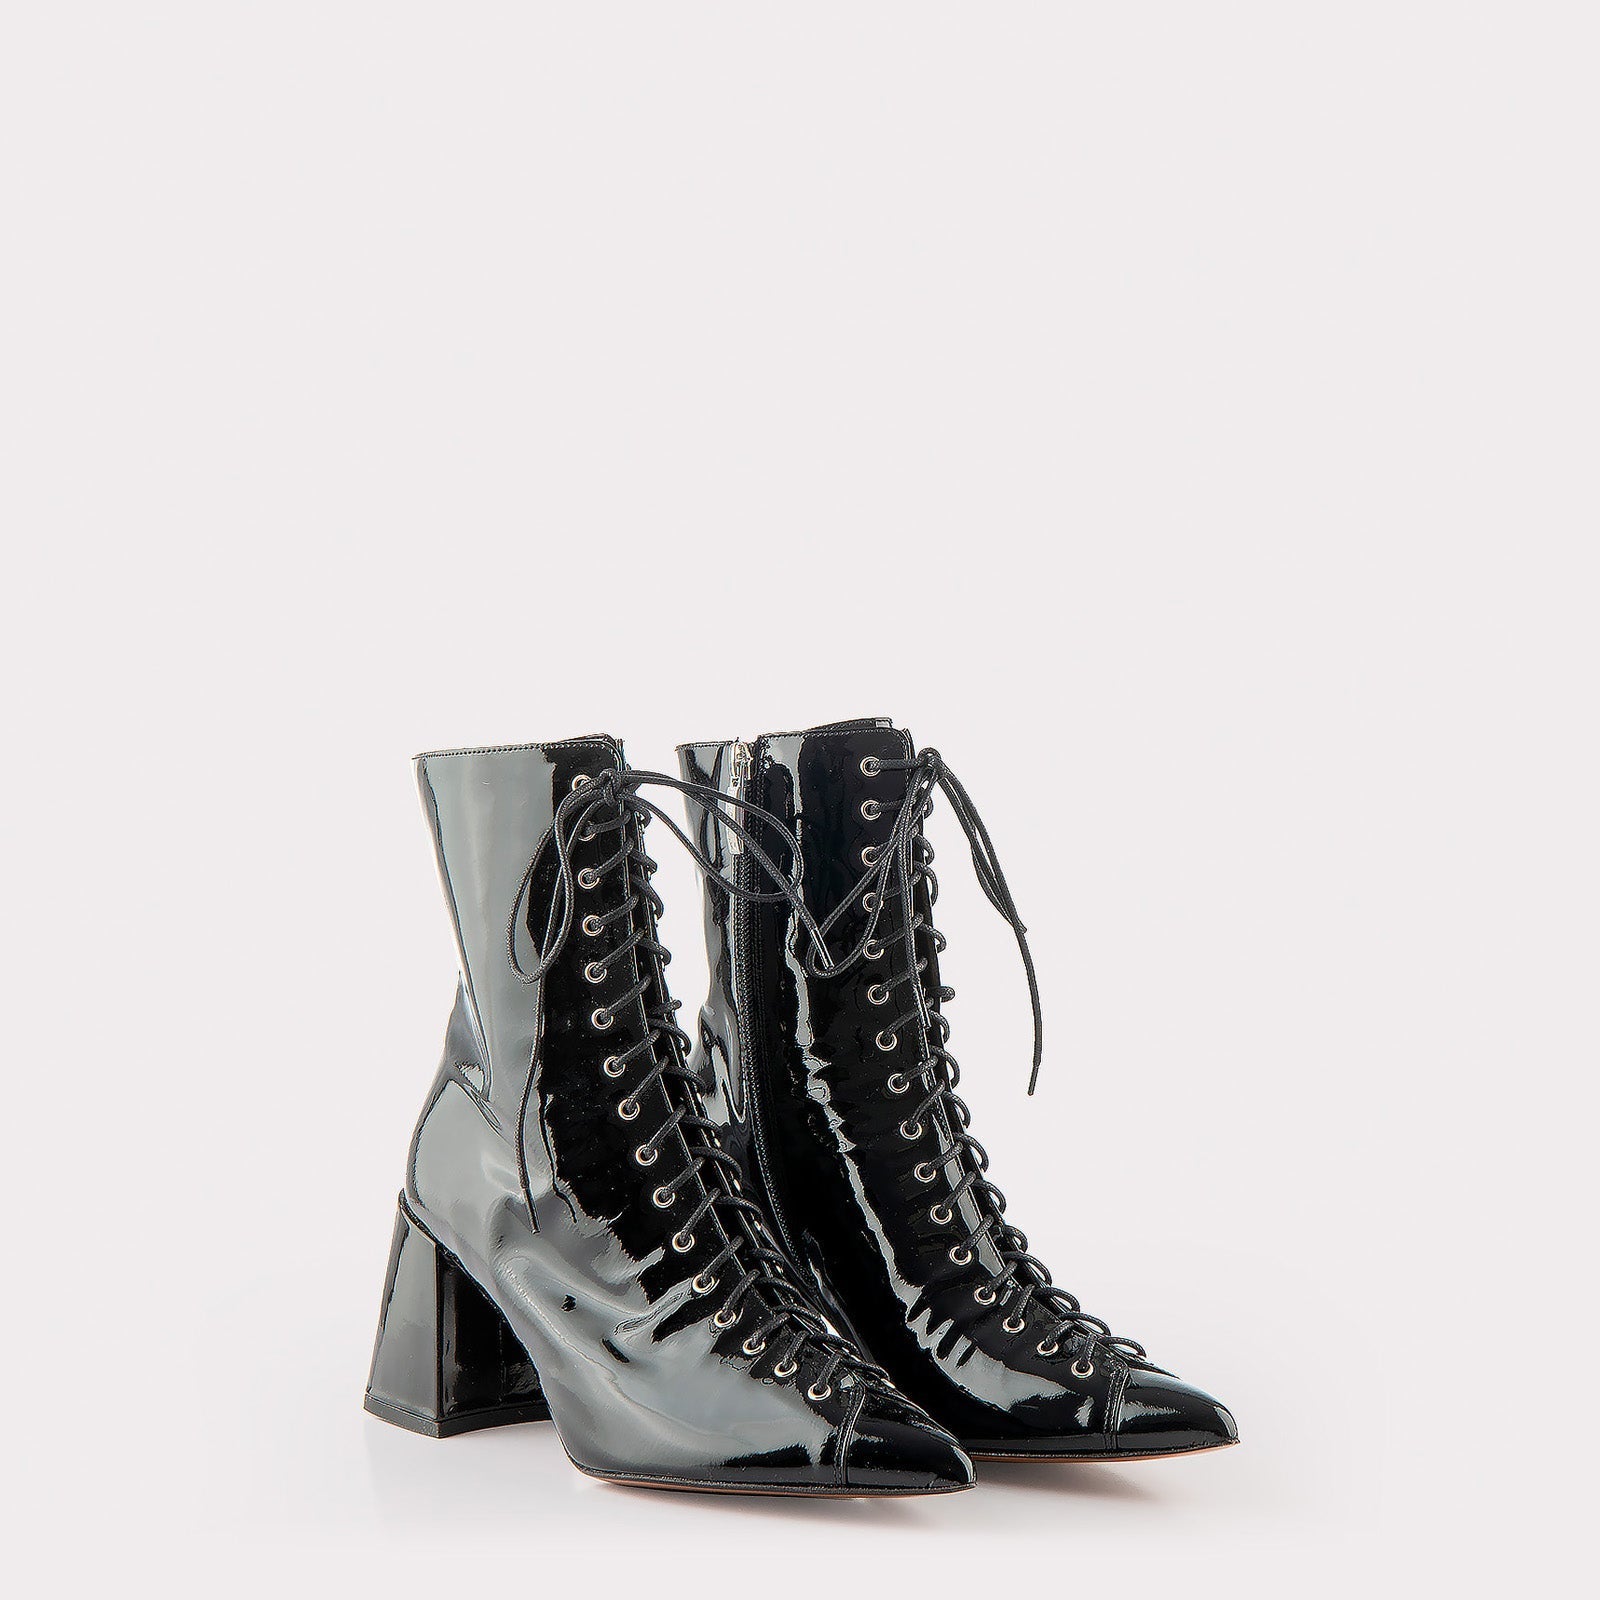 JOLIE 01 BLACK PATENT LEATHER ANKLE BOOTS